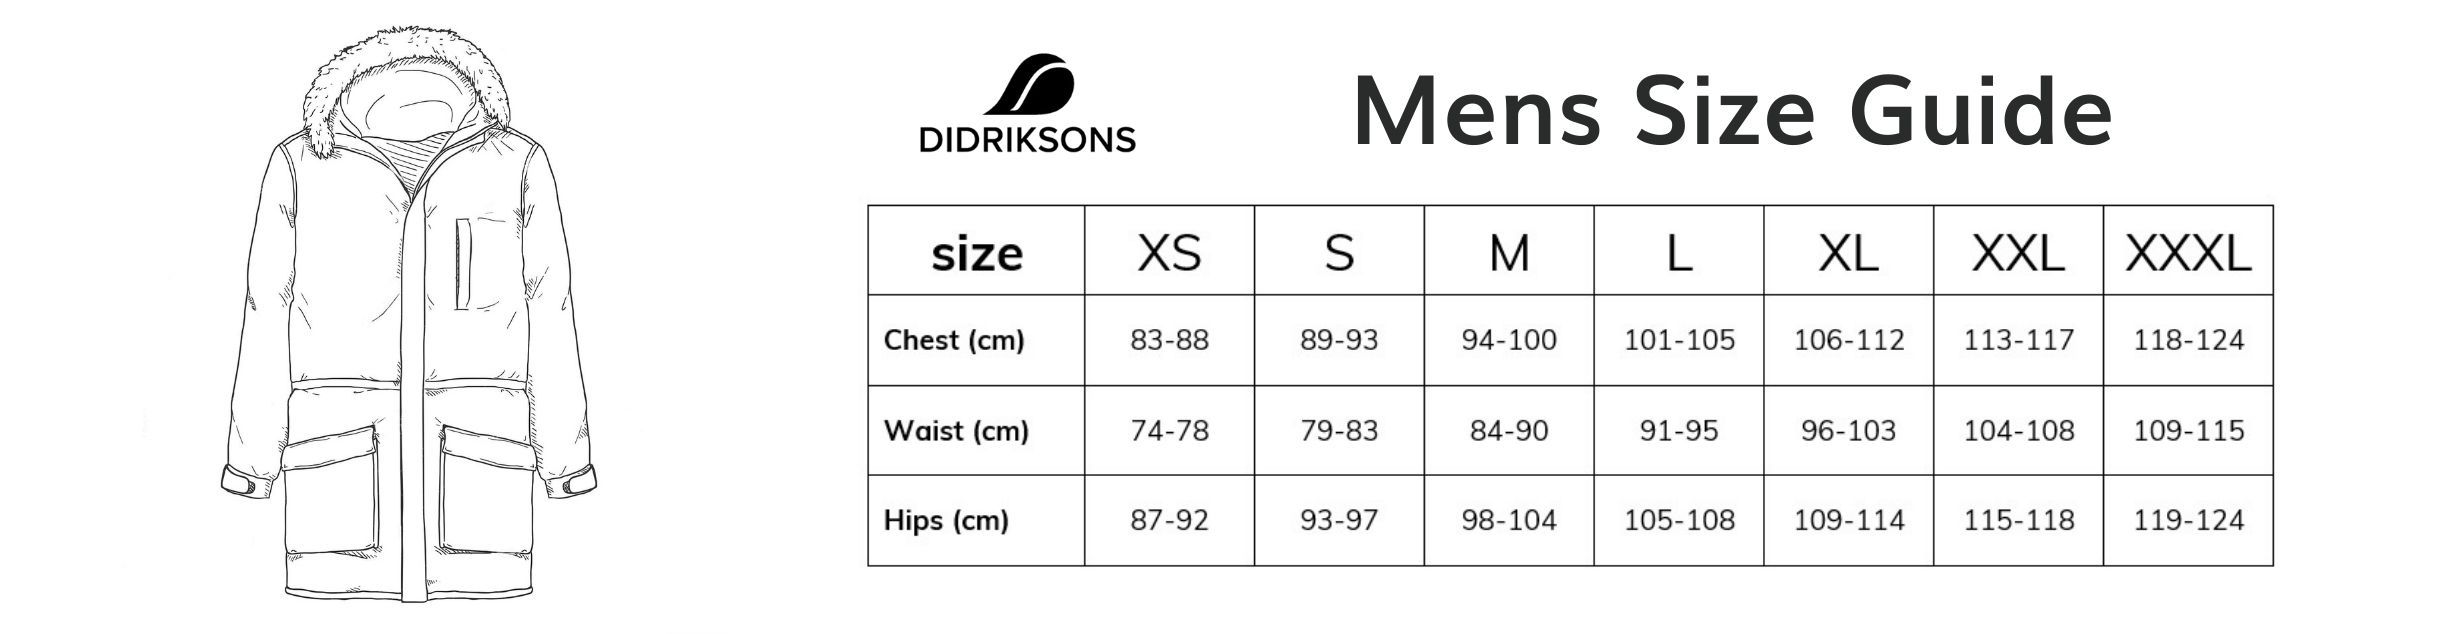 ondsindet Snazzy Rug Didriksons Size Guide - Nordic Outdoor